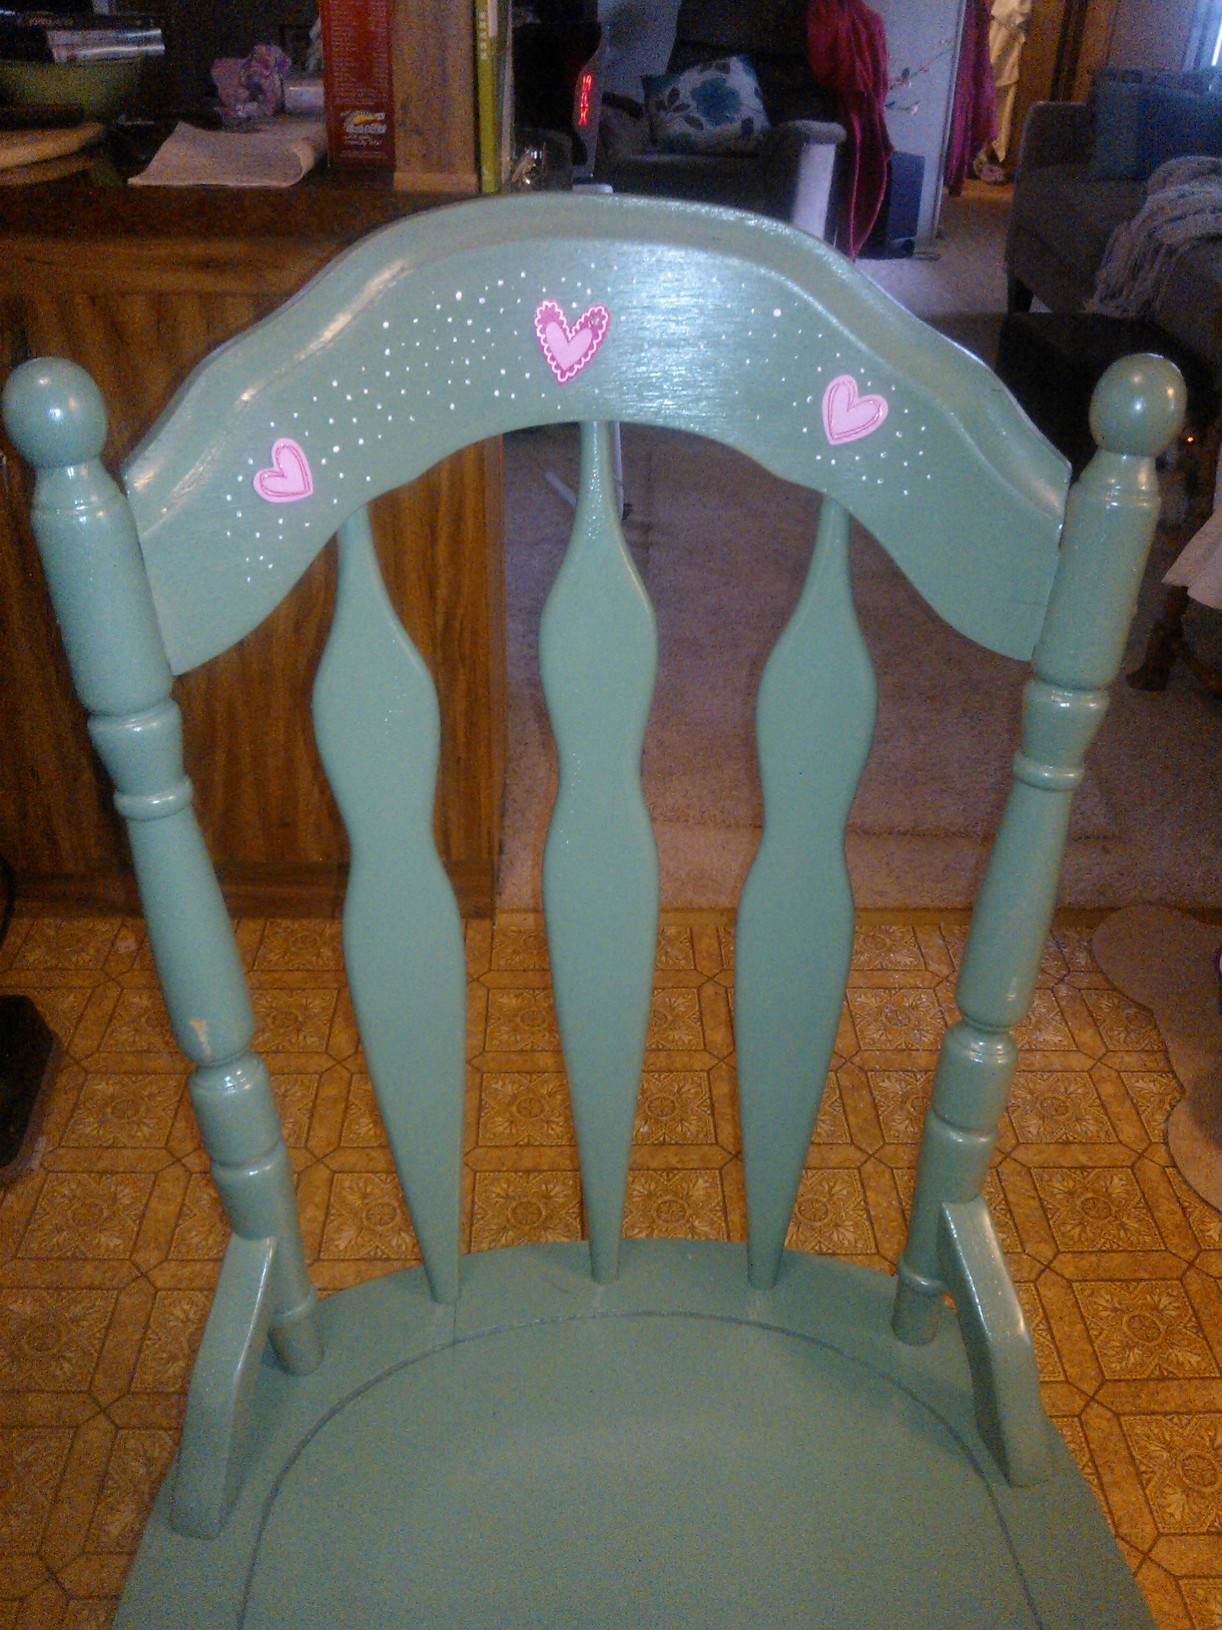 My new - old Chair!